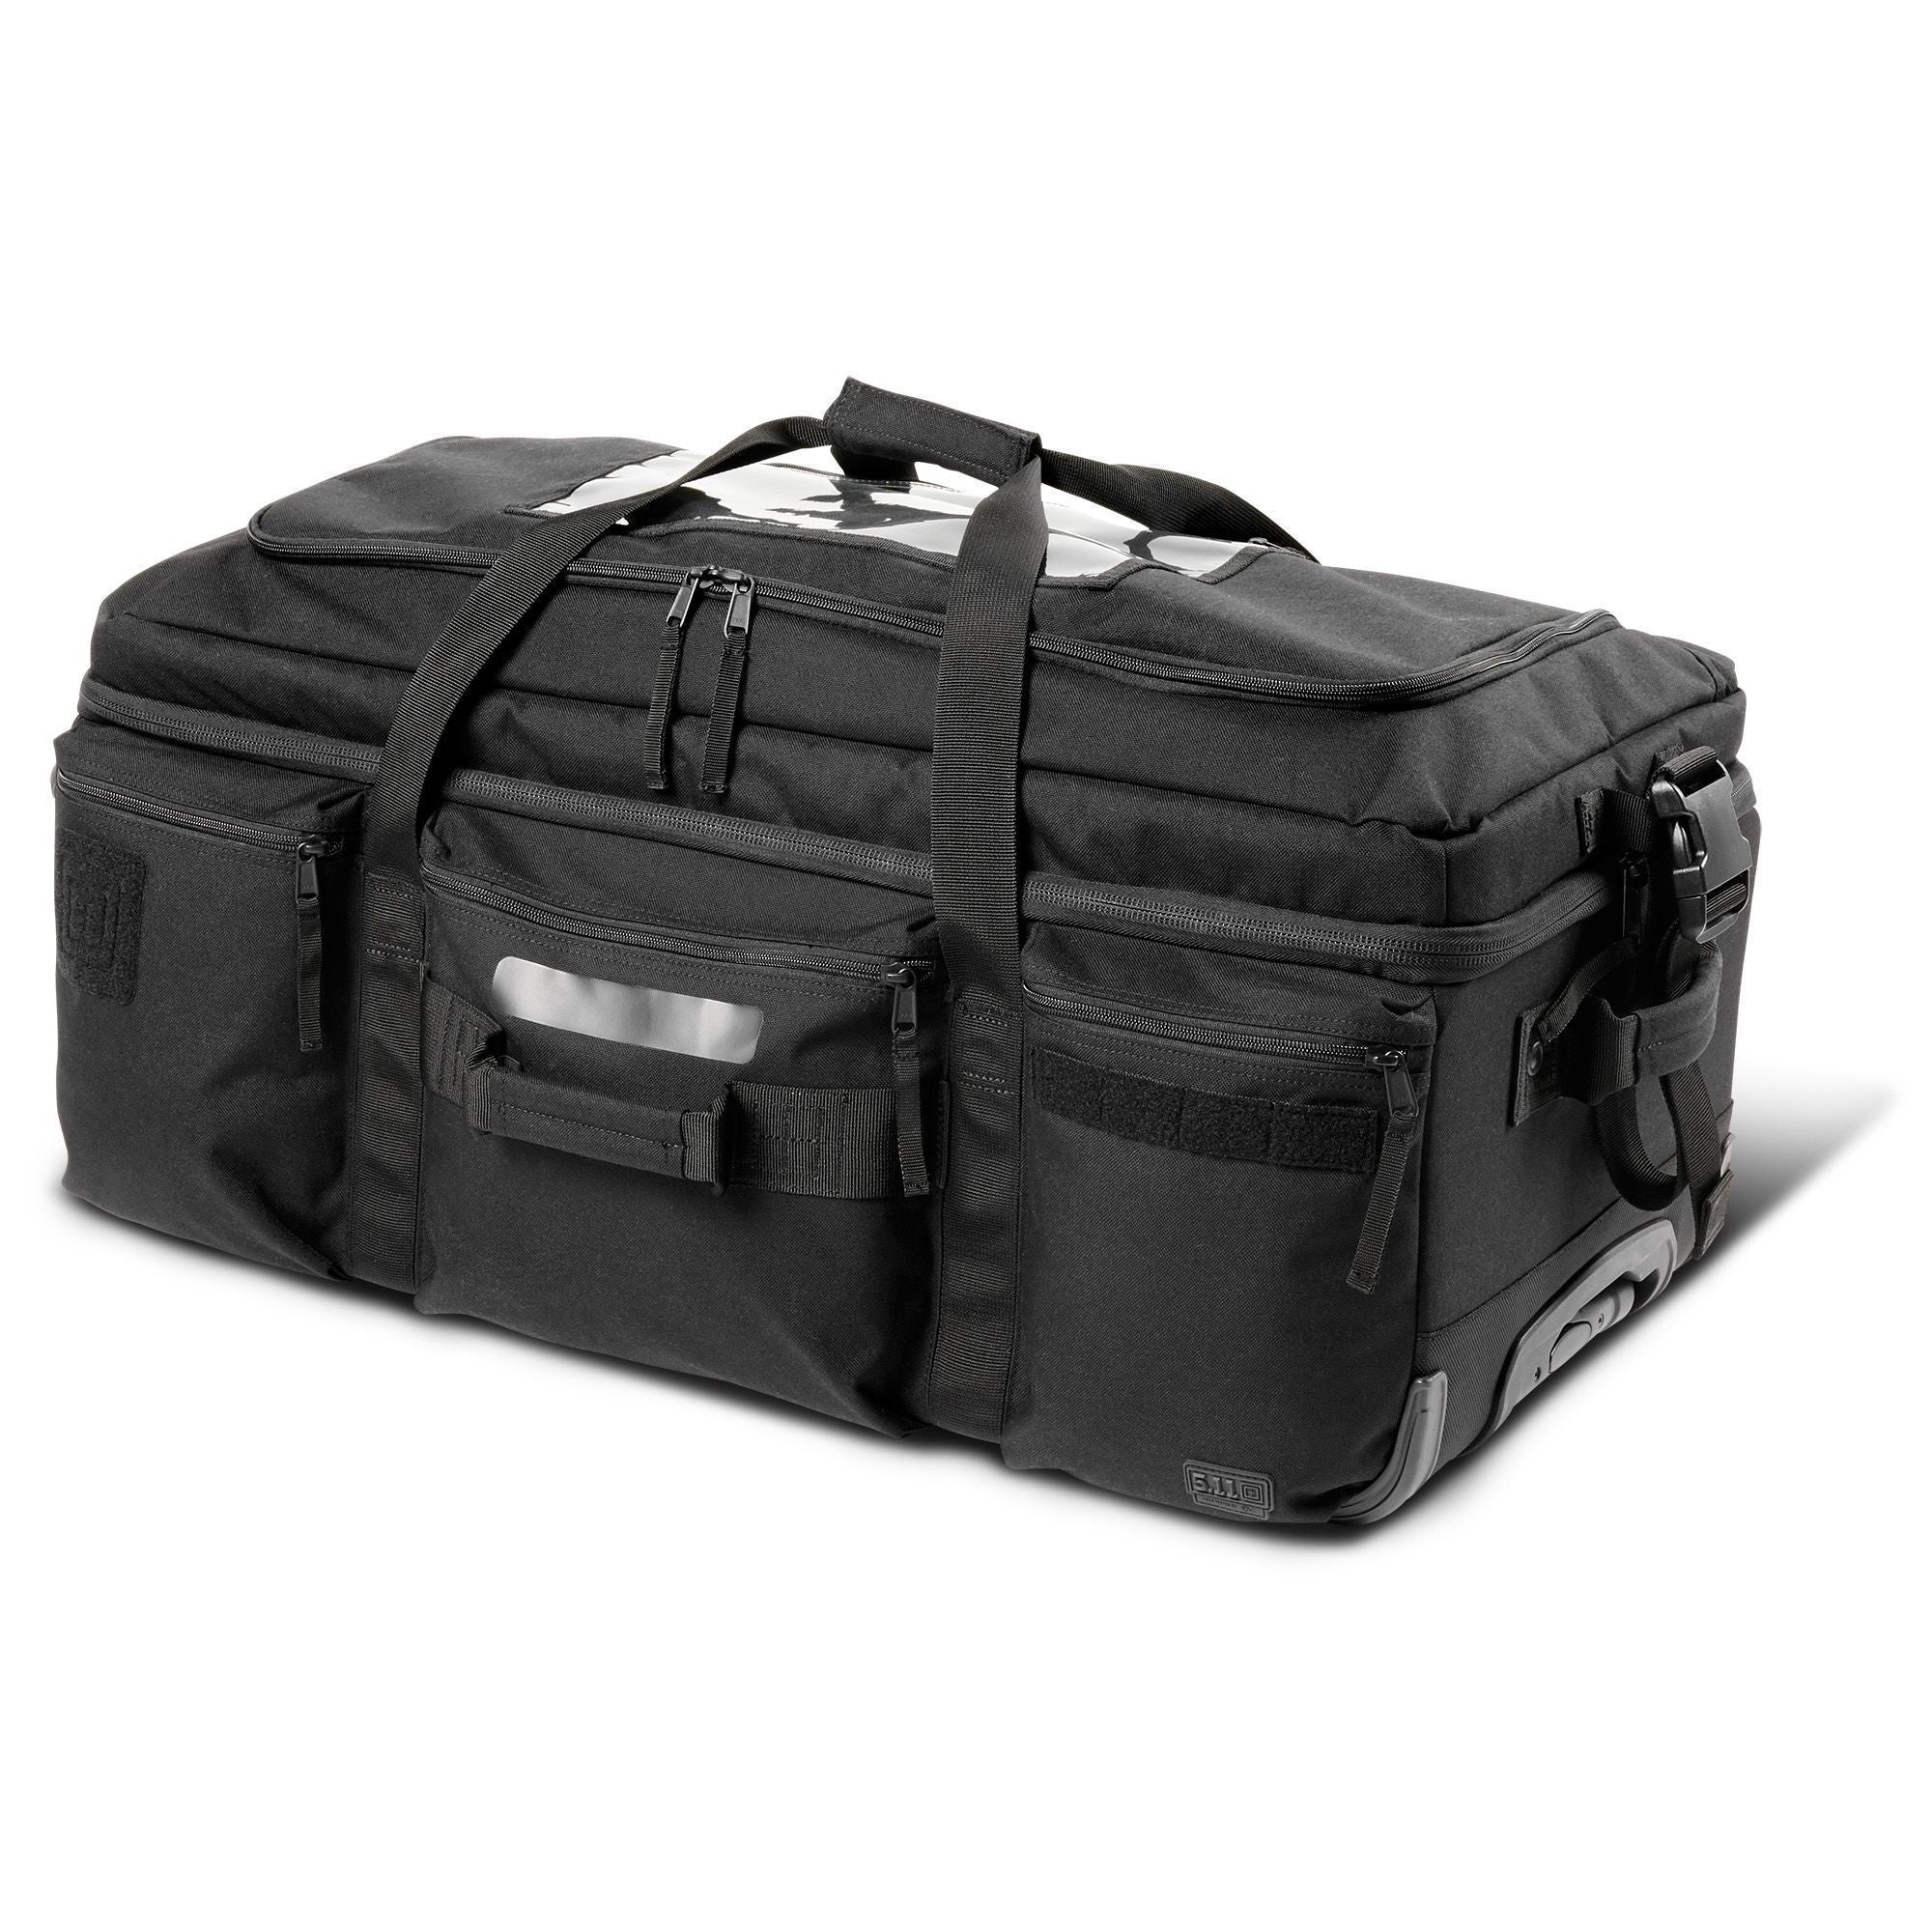 5.11 Tactical Mission Ready 3.0 Bag Bags, Packs and Cases 5.11 Tactical Black Tactical Gear Supplier Tactical Distributors Australia